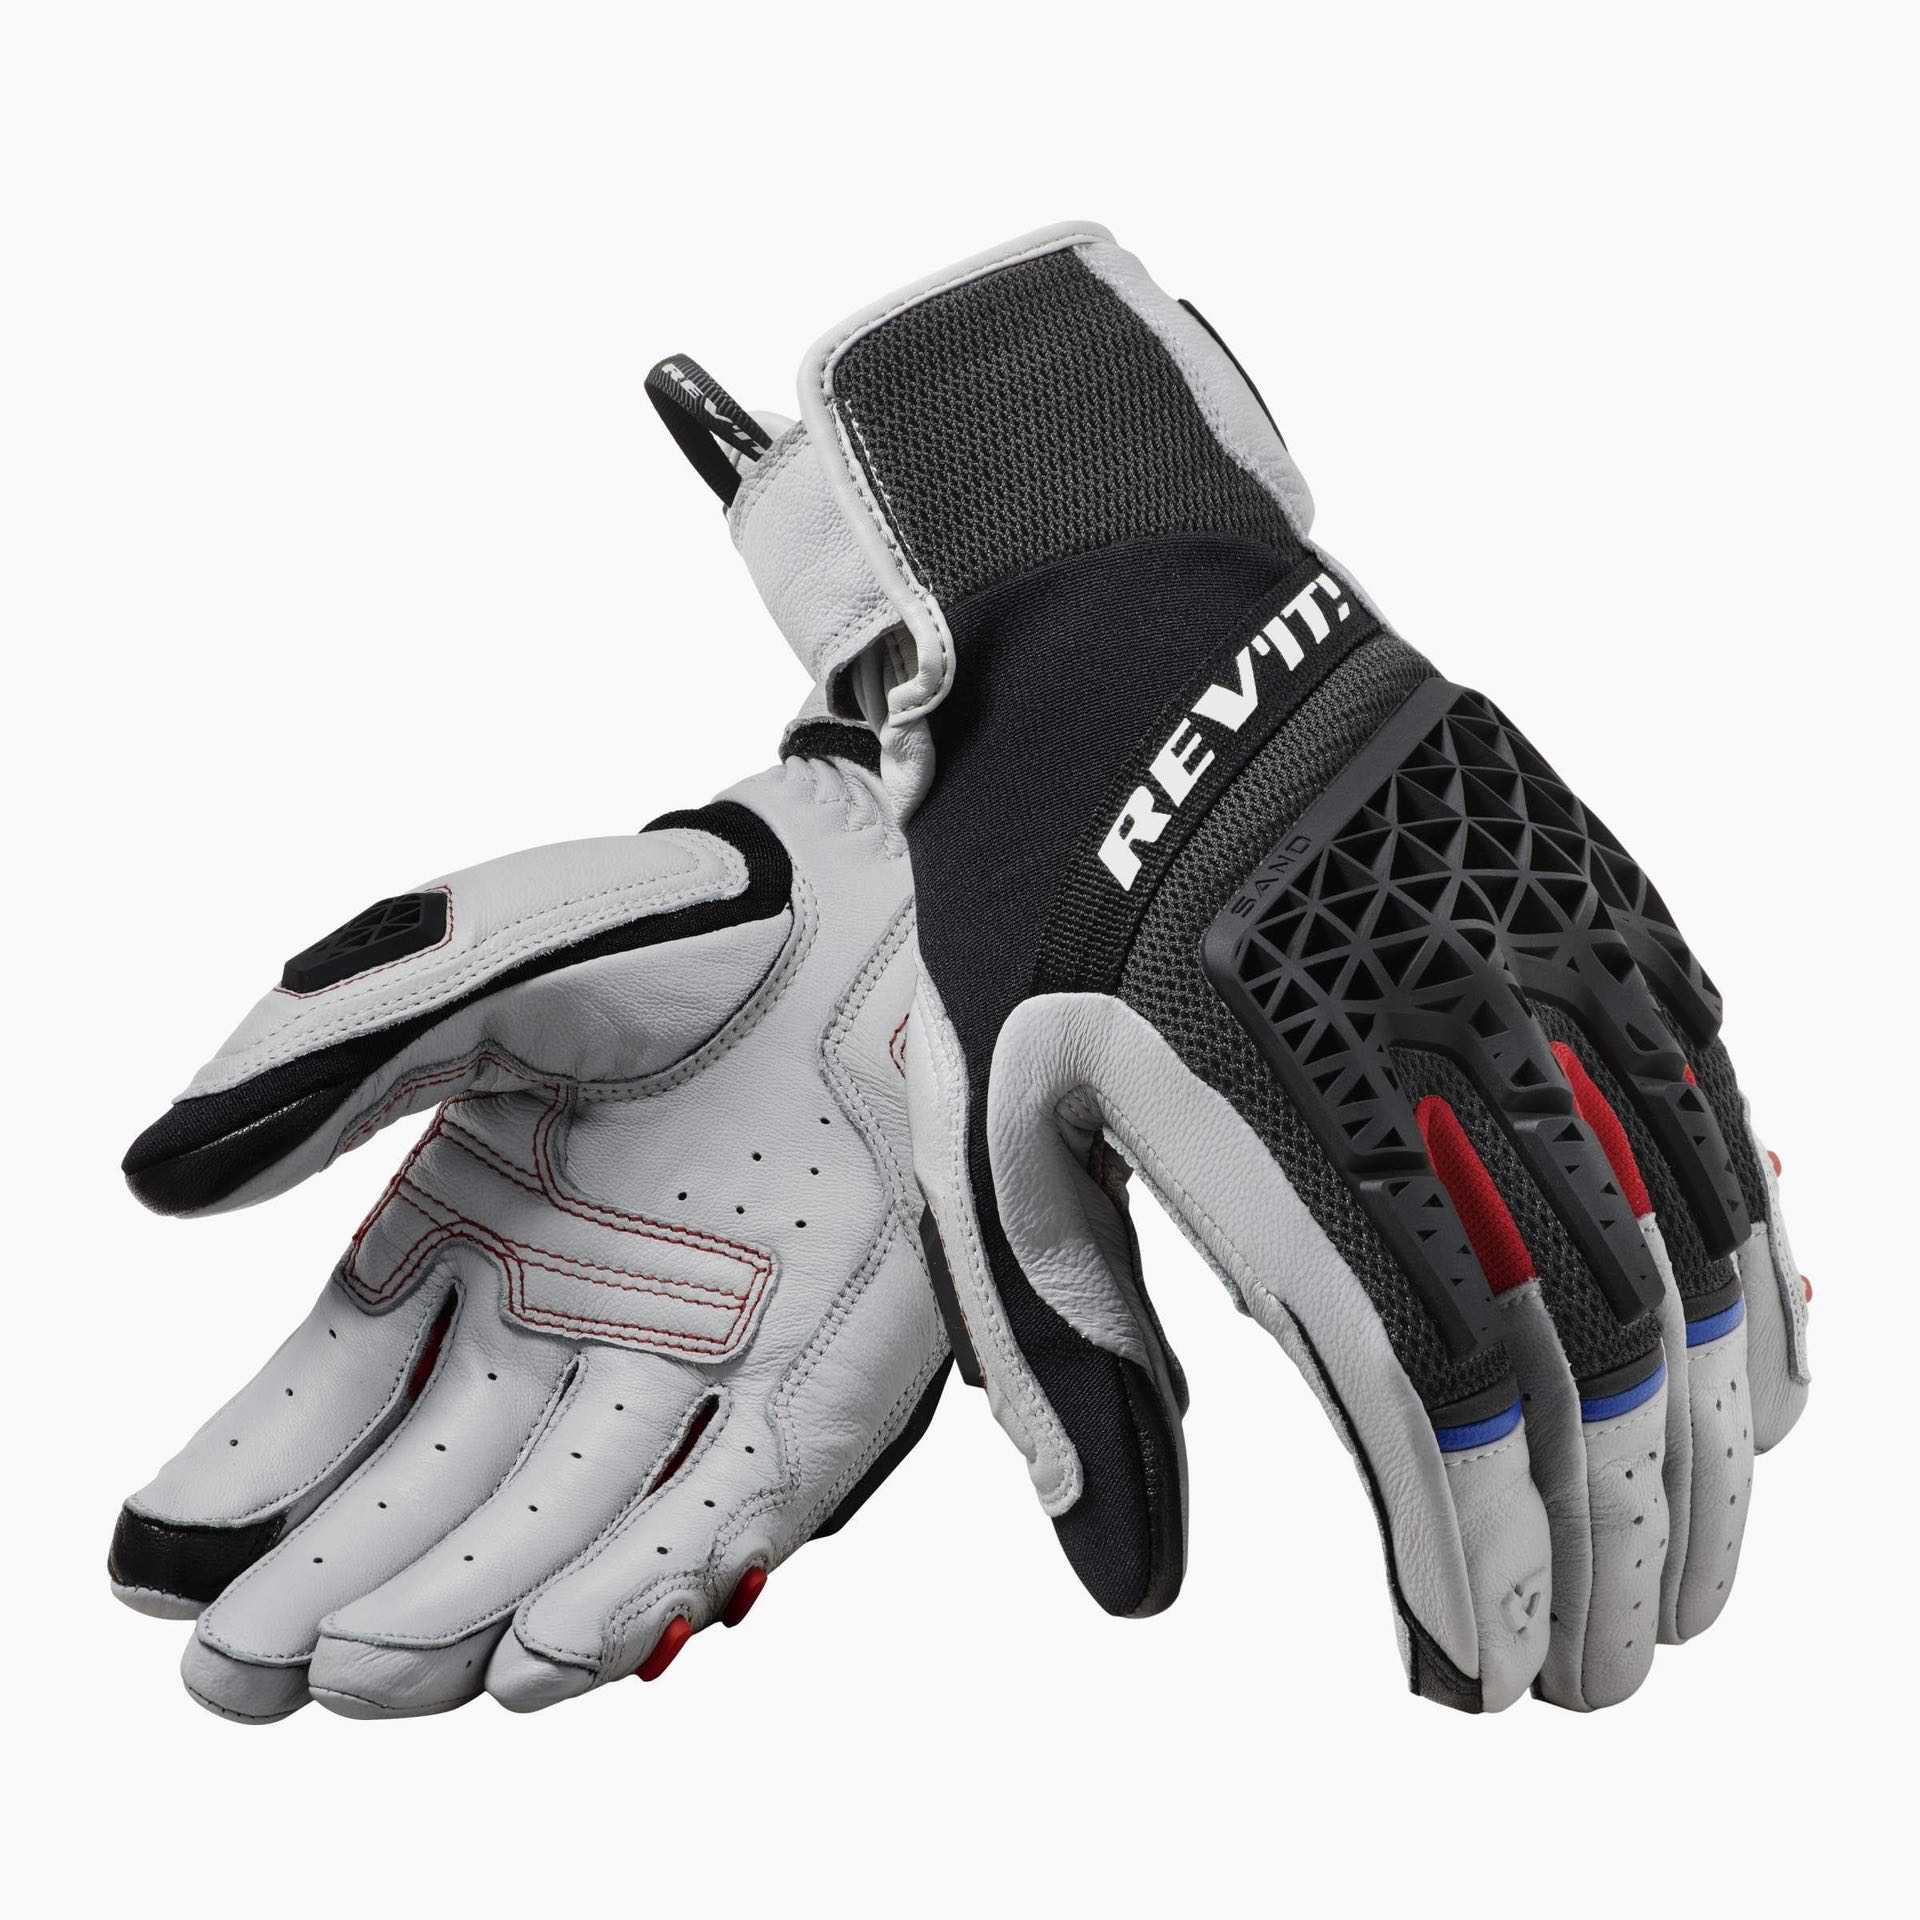 REV'IT Sand 4 Gloves in black and light grey on white background